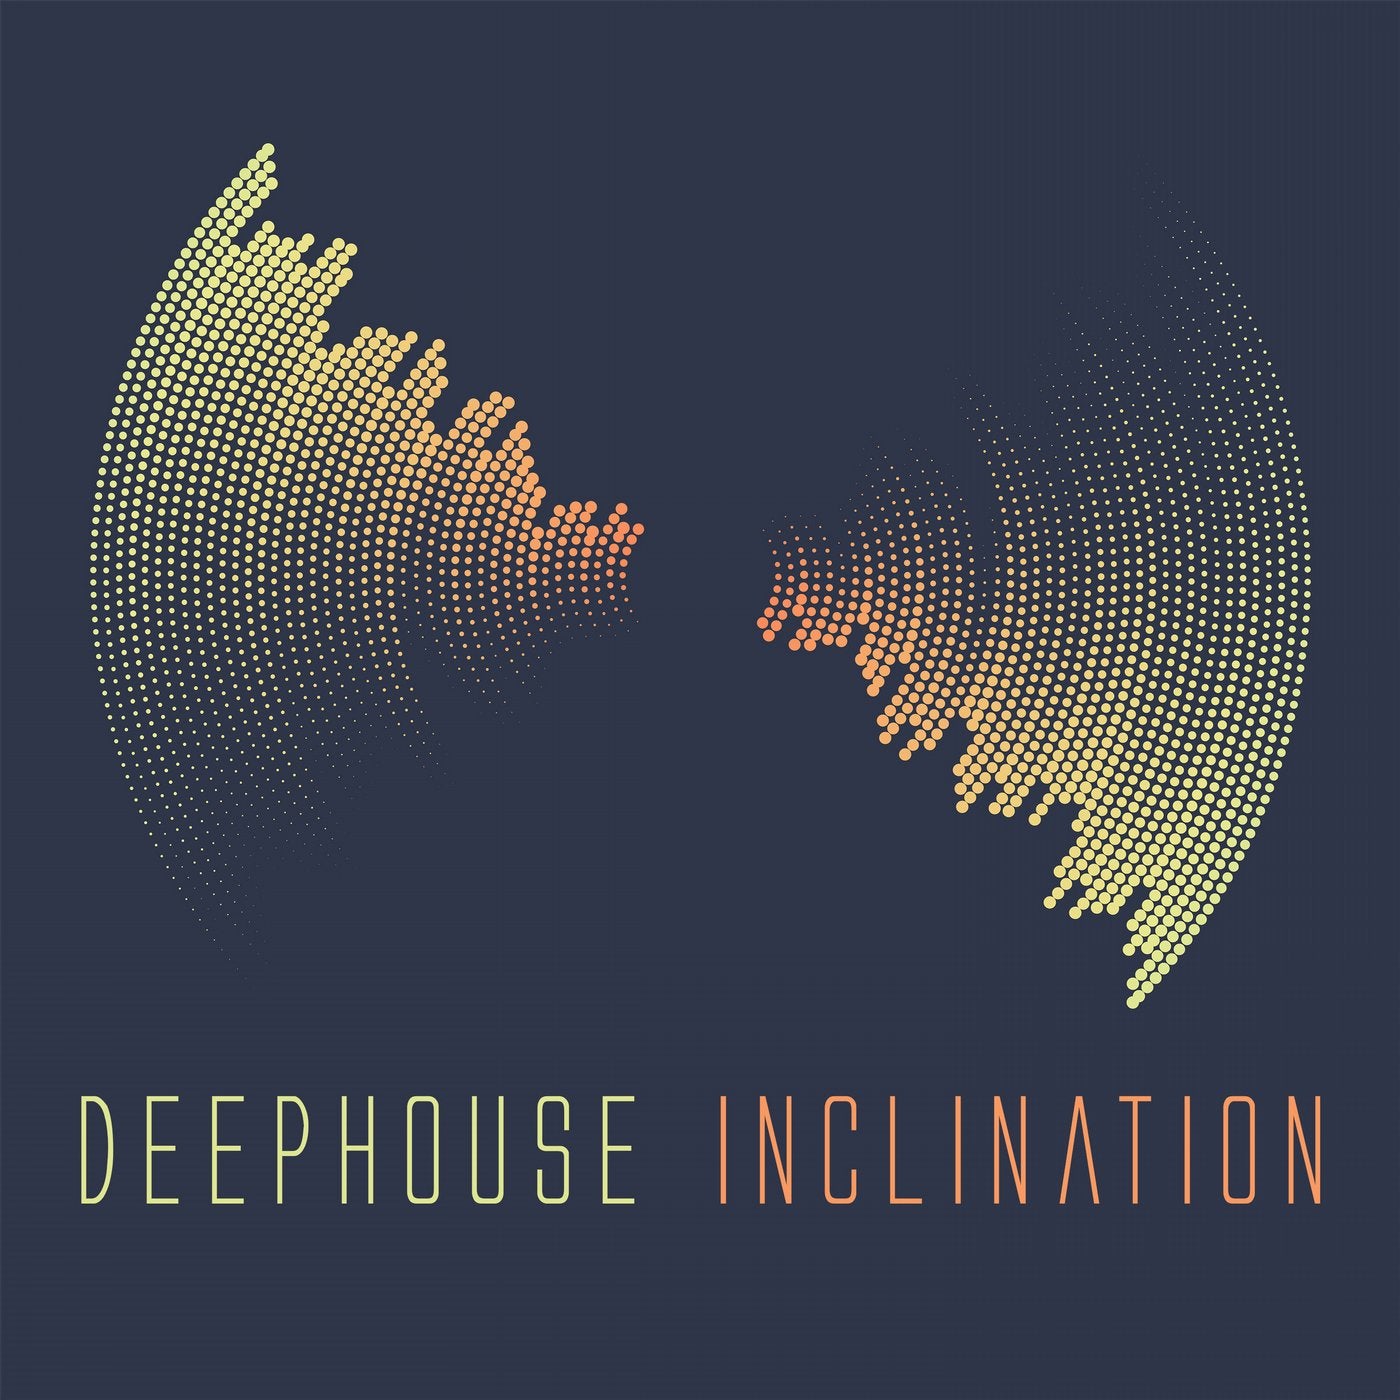 Deephouse Inclination